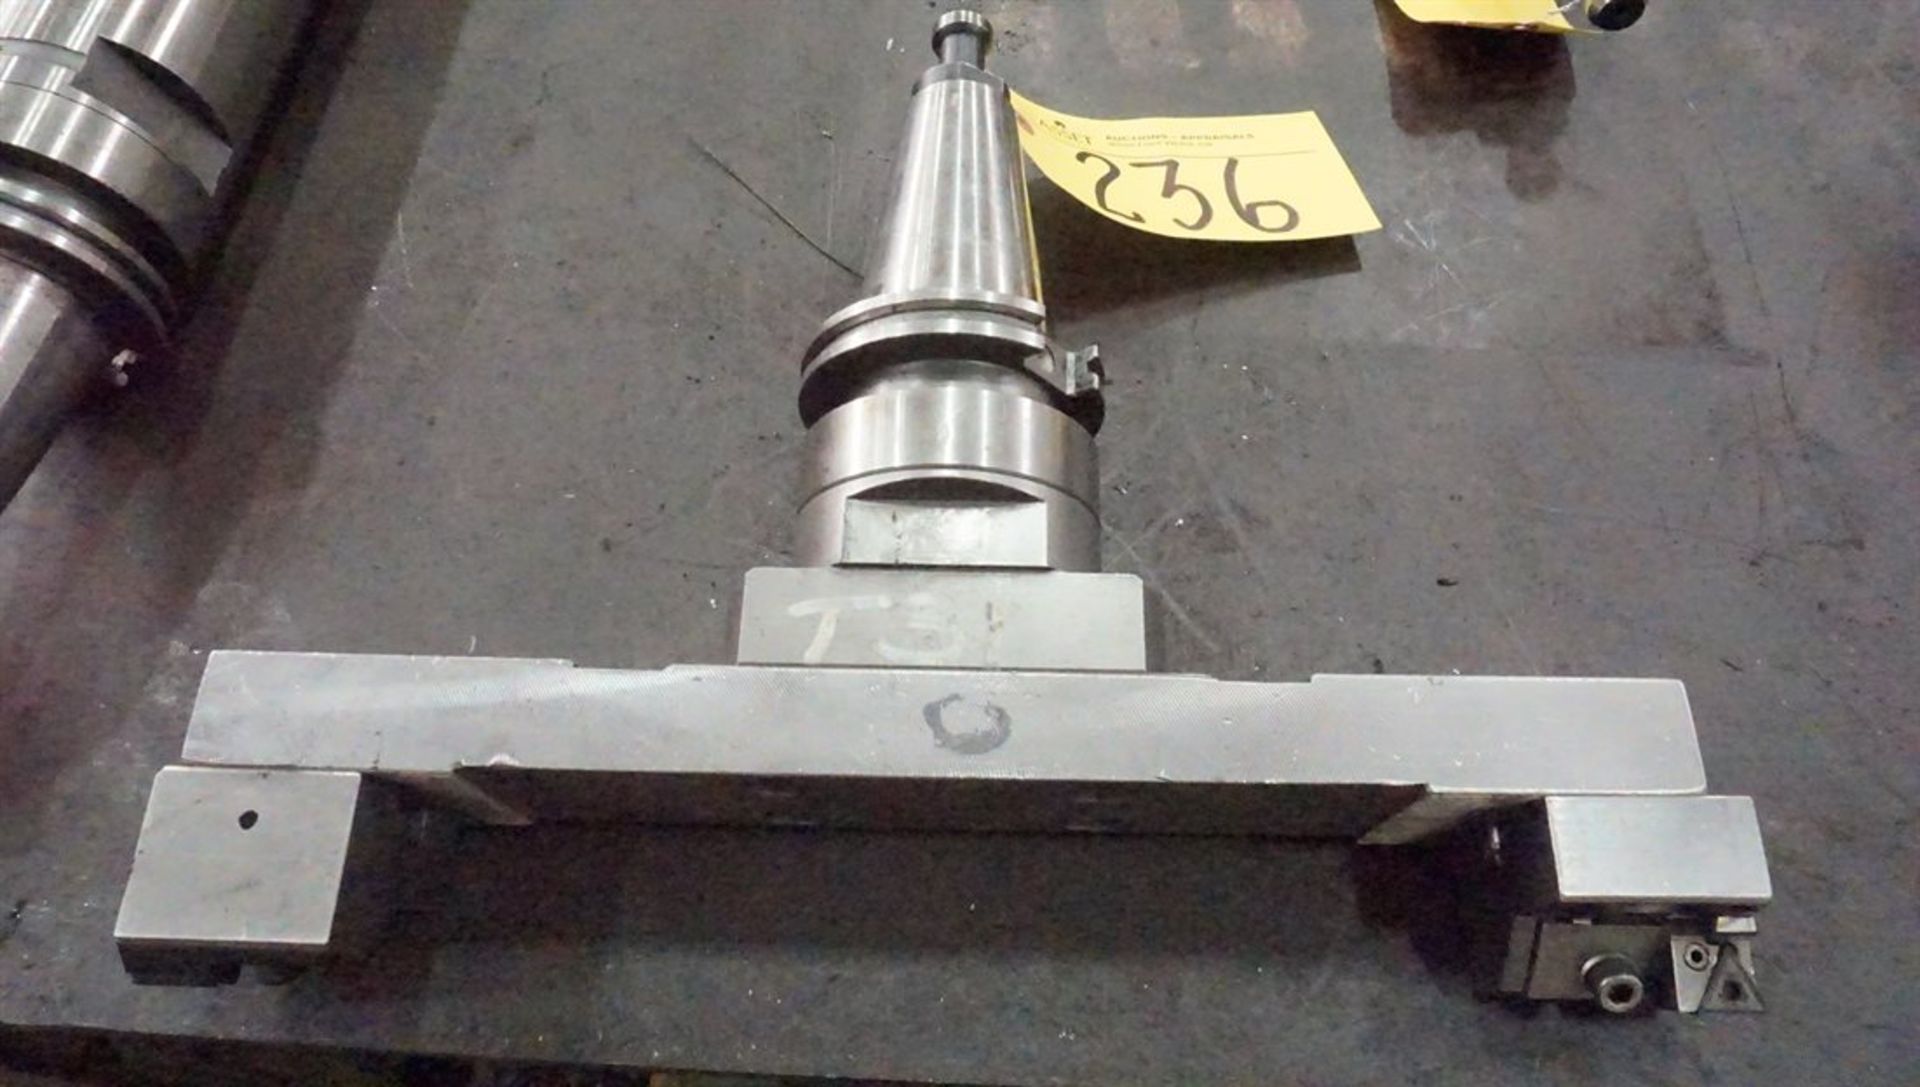 Widax 50 Taper Tool Holder w/ Indexable Tooling